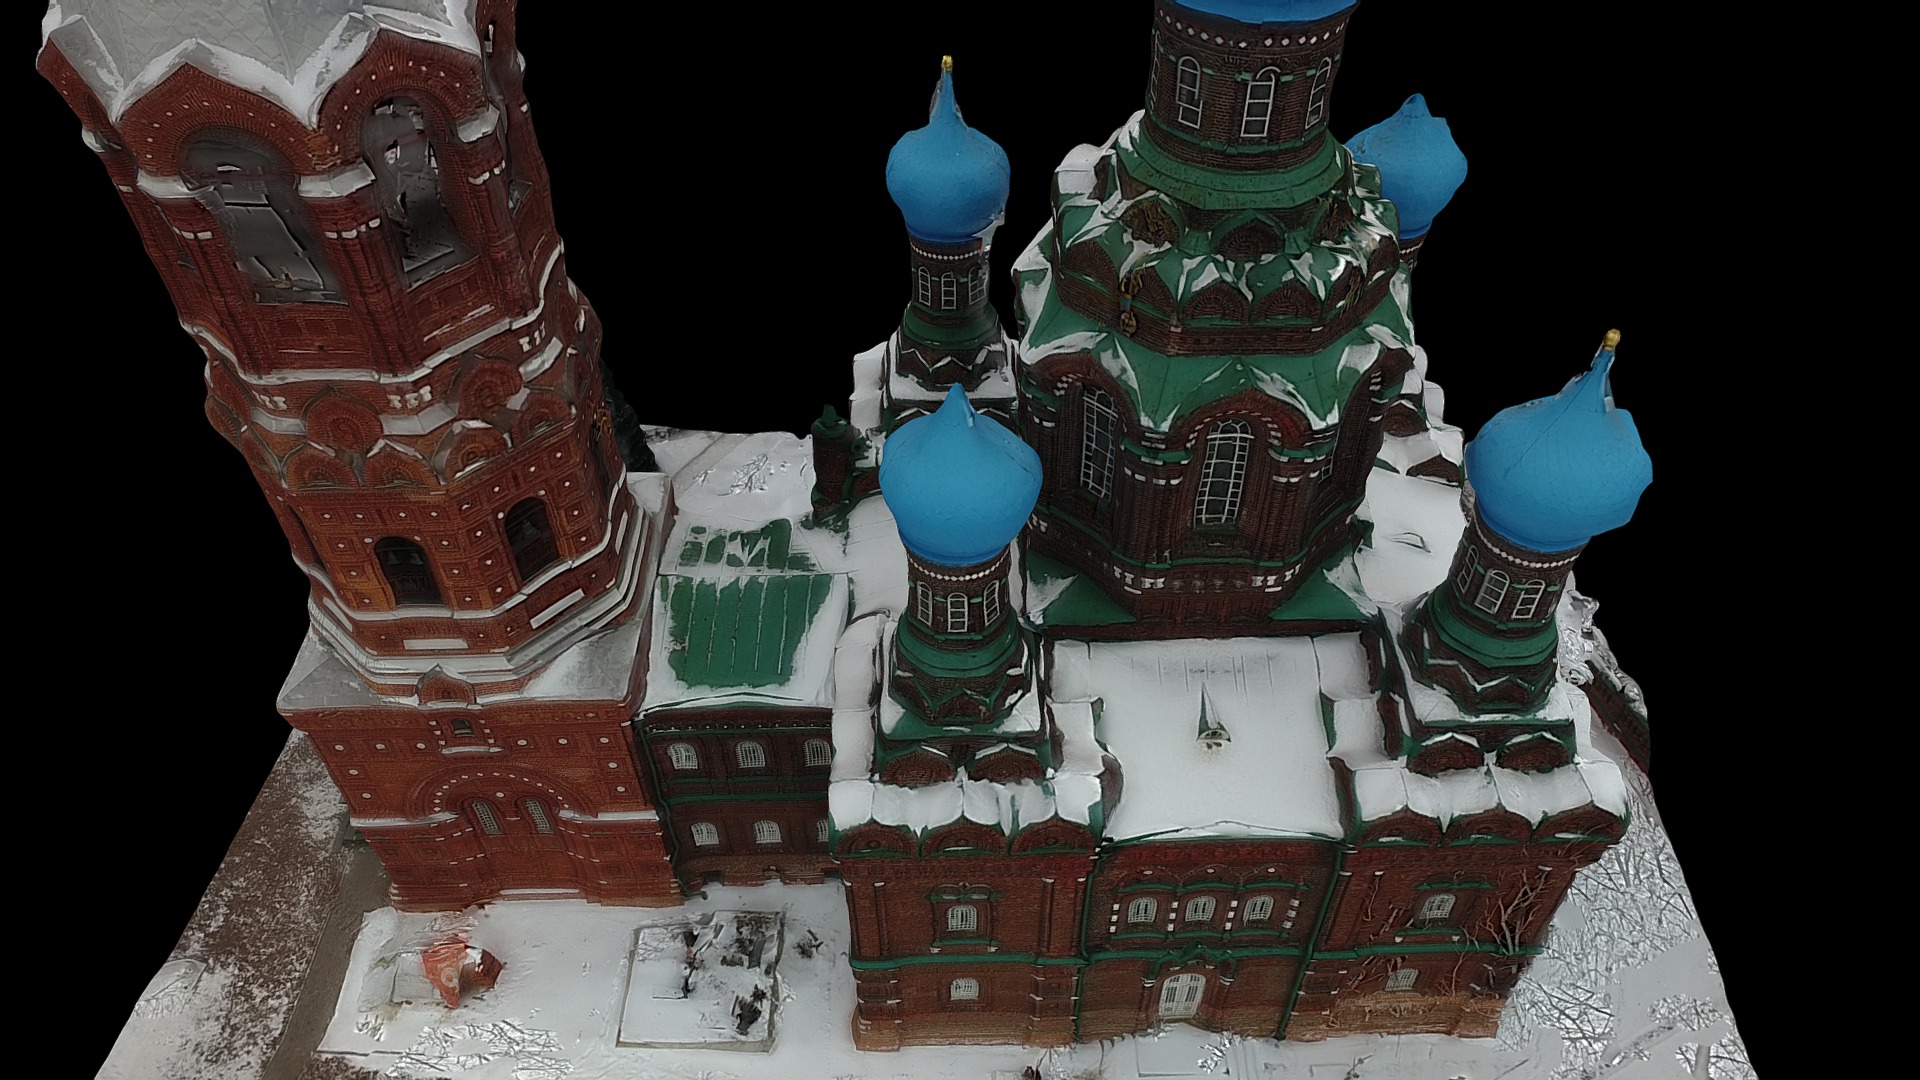 3D model Tарасовка храм - This is a 3D model of the Tарасовка храм. The 3D model is about a group of toy buildings.